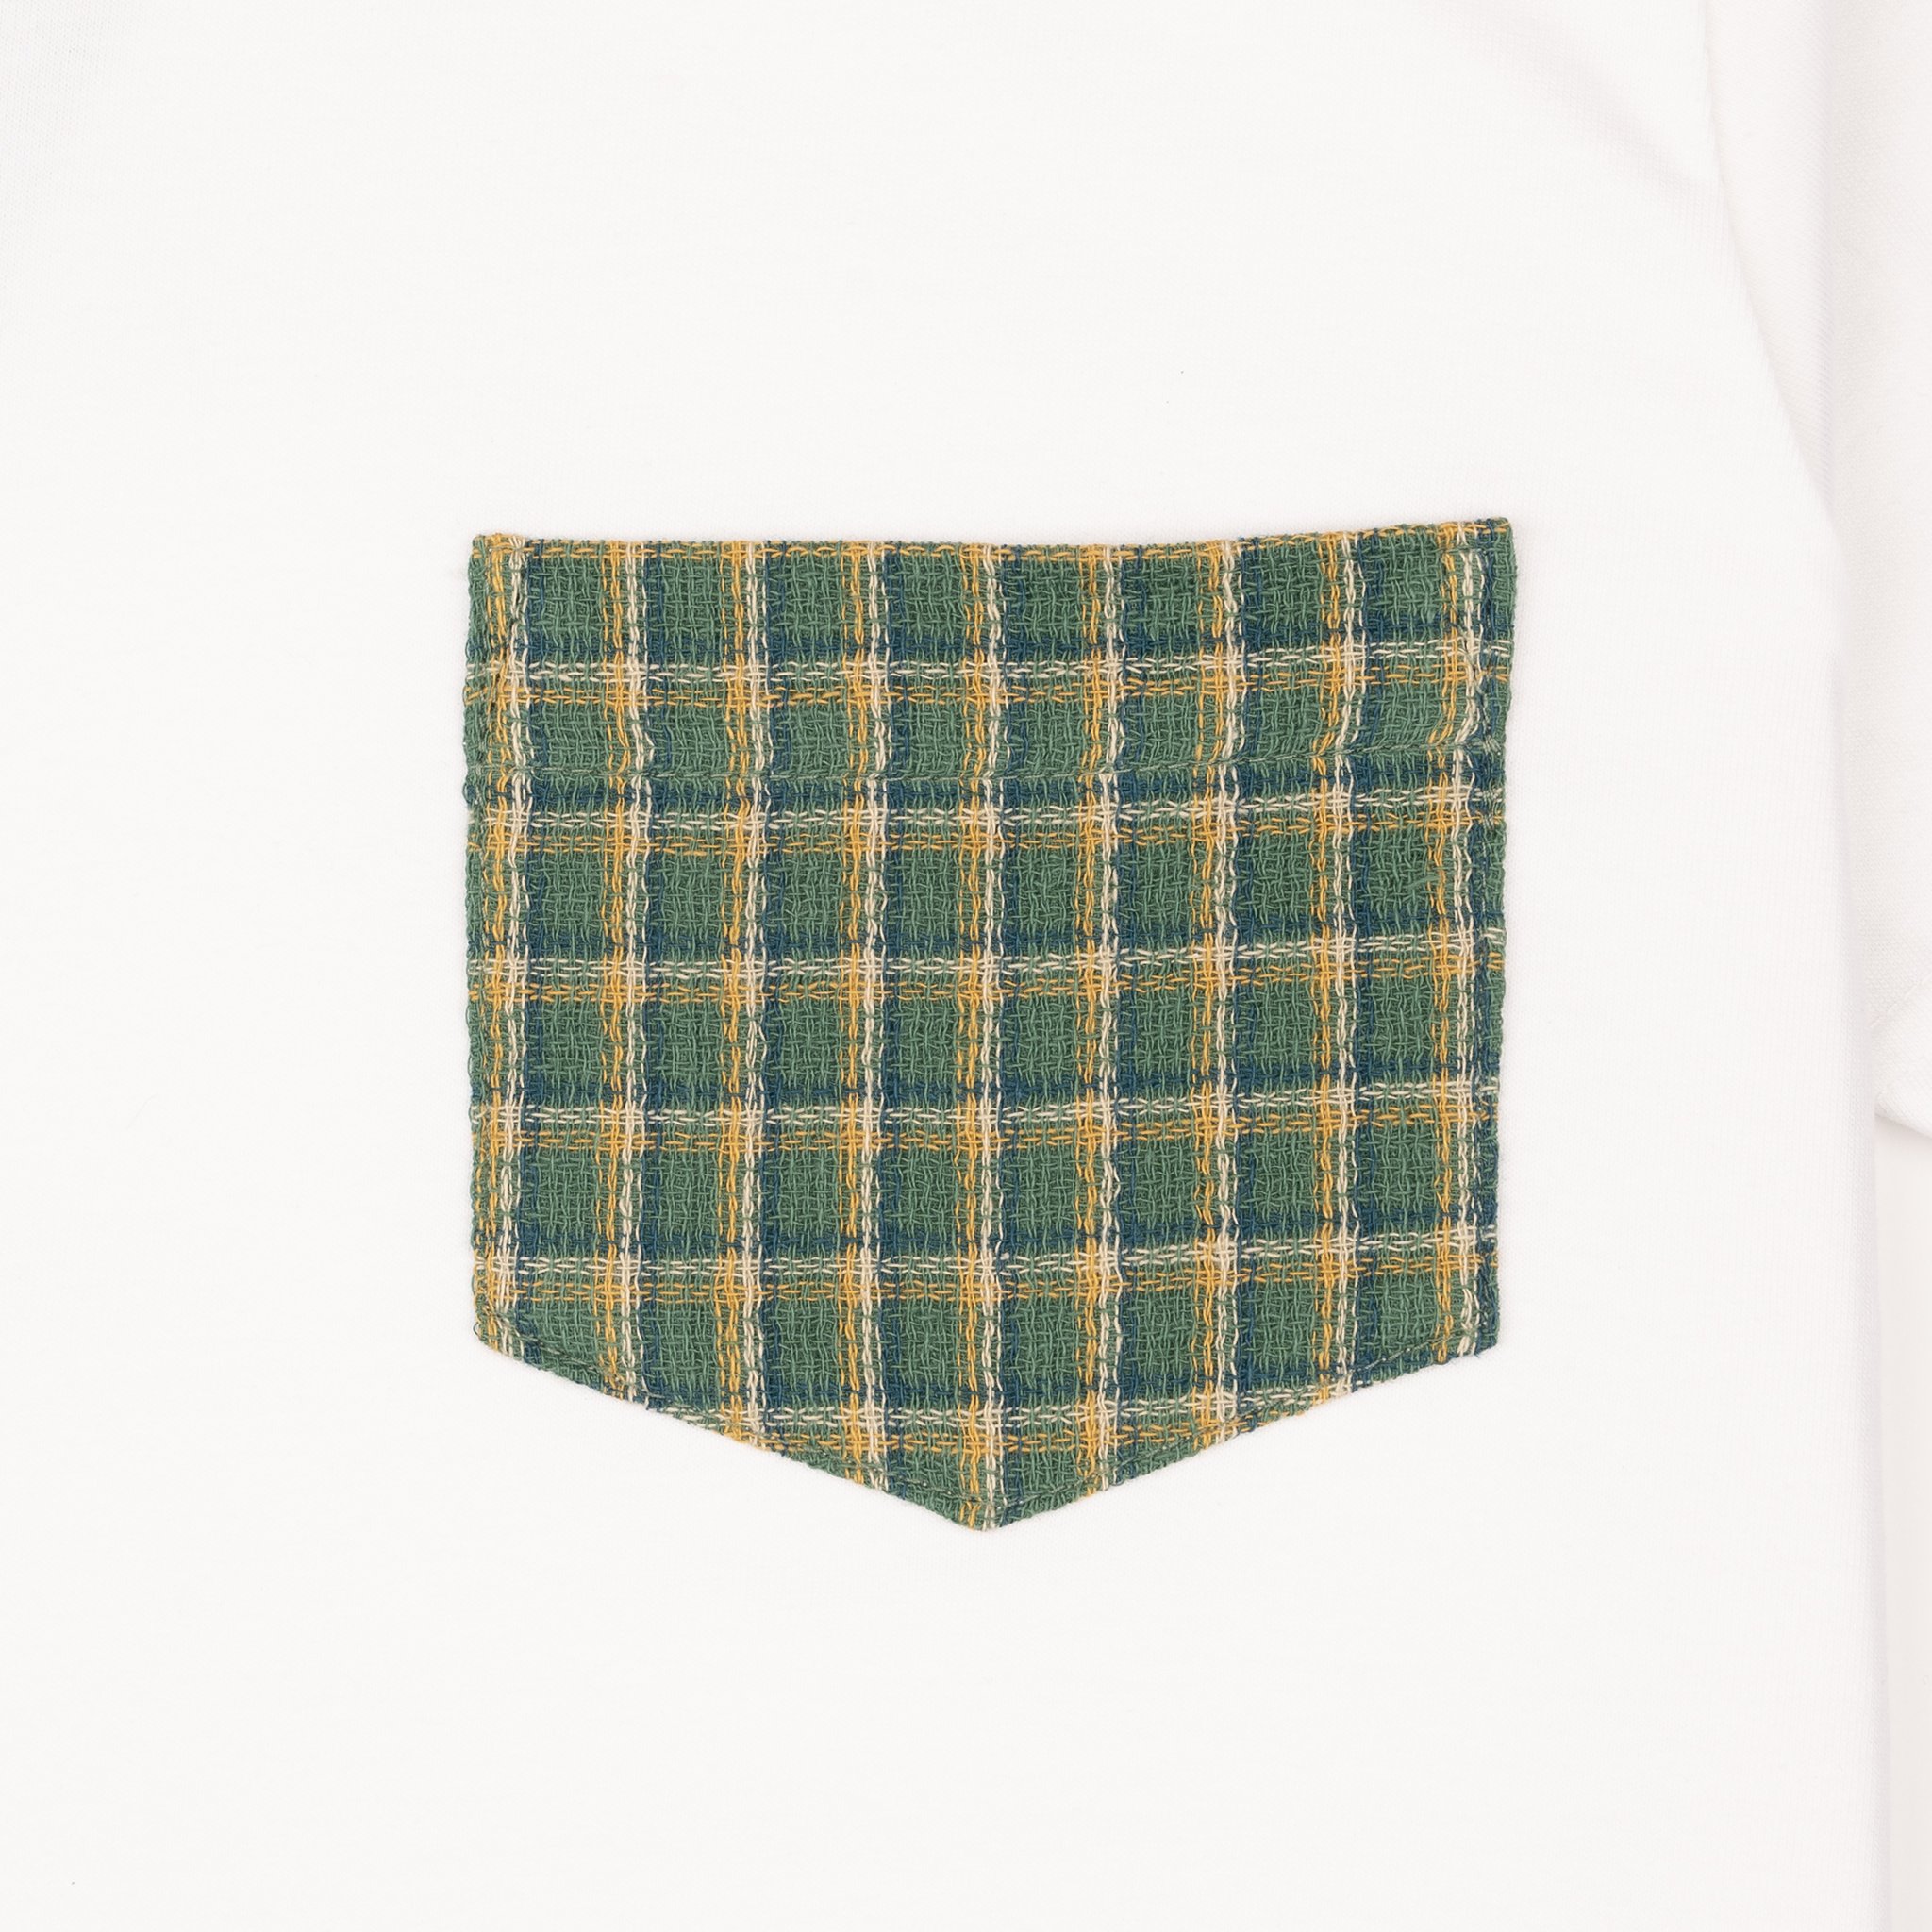  Pocket Tee - White + Yarn Dyed Double Cloth Green 